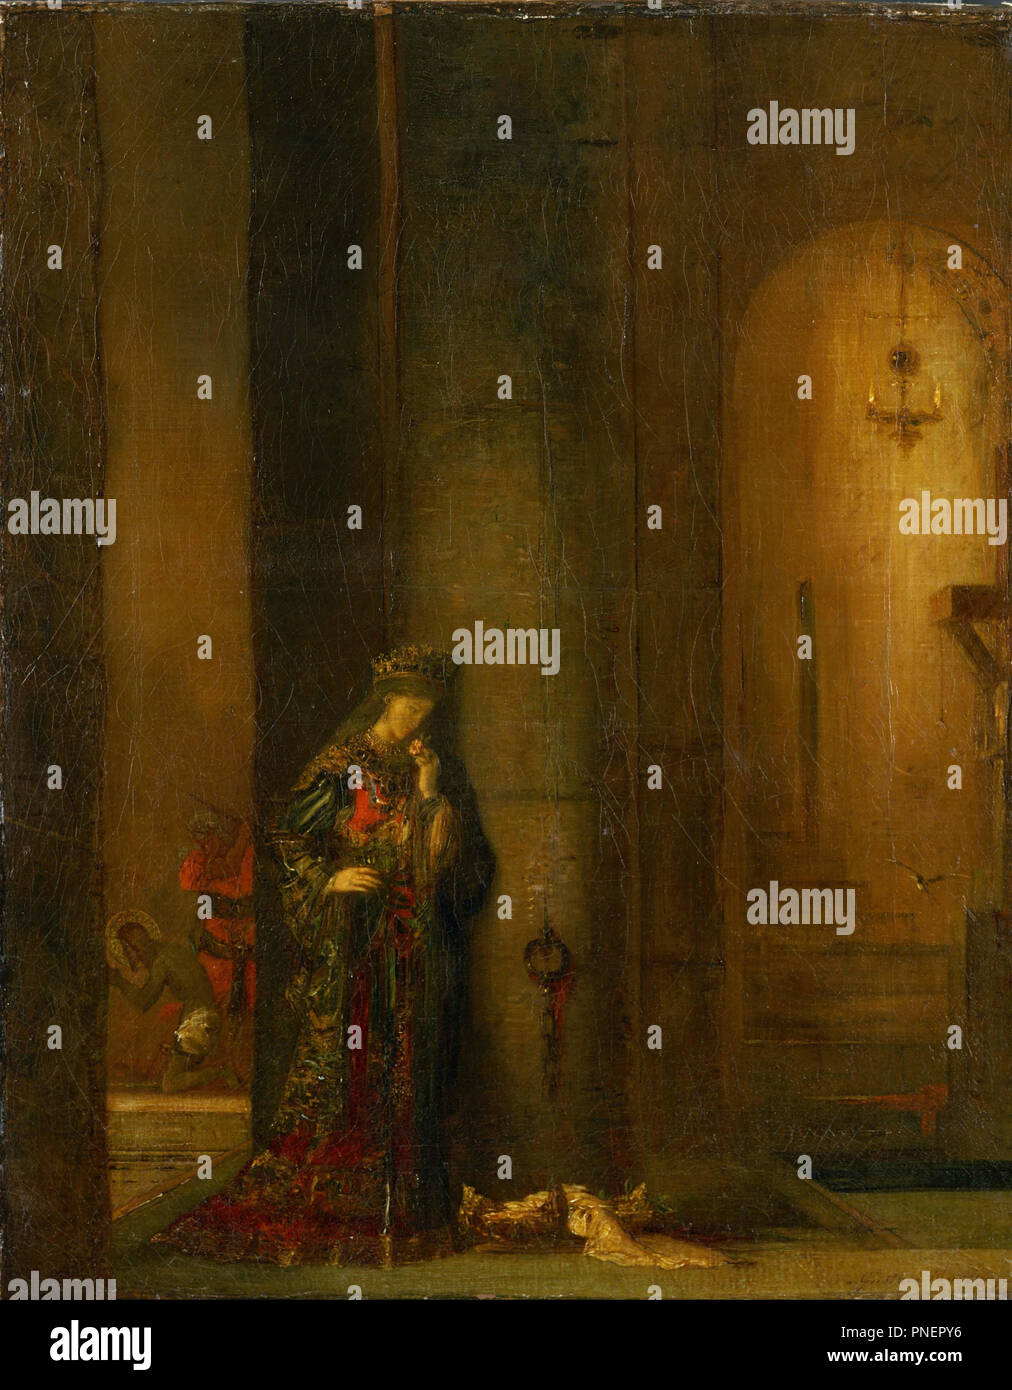 Salome at the Prison. Date/Period: Ca. 1873-76. Painting. Oil on canvas Oil on canvas. Height: 400 mm (15.74 in); Width: 320 mm (12.59 in). Author: GUSTAVE MOREAU. MOREAU, GUSTAVE. Stock Photo